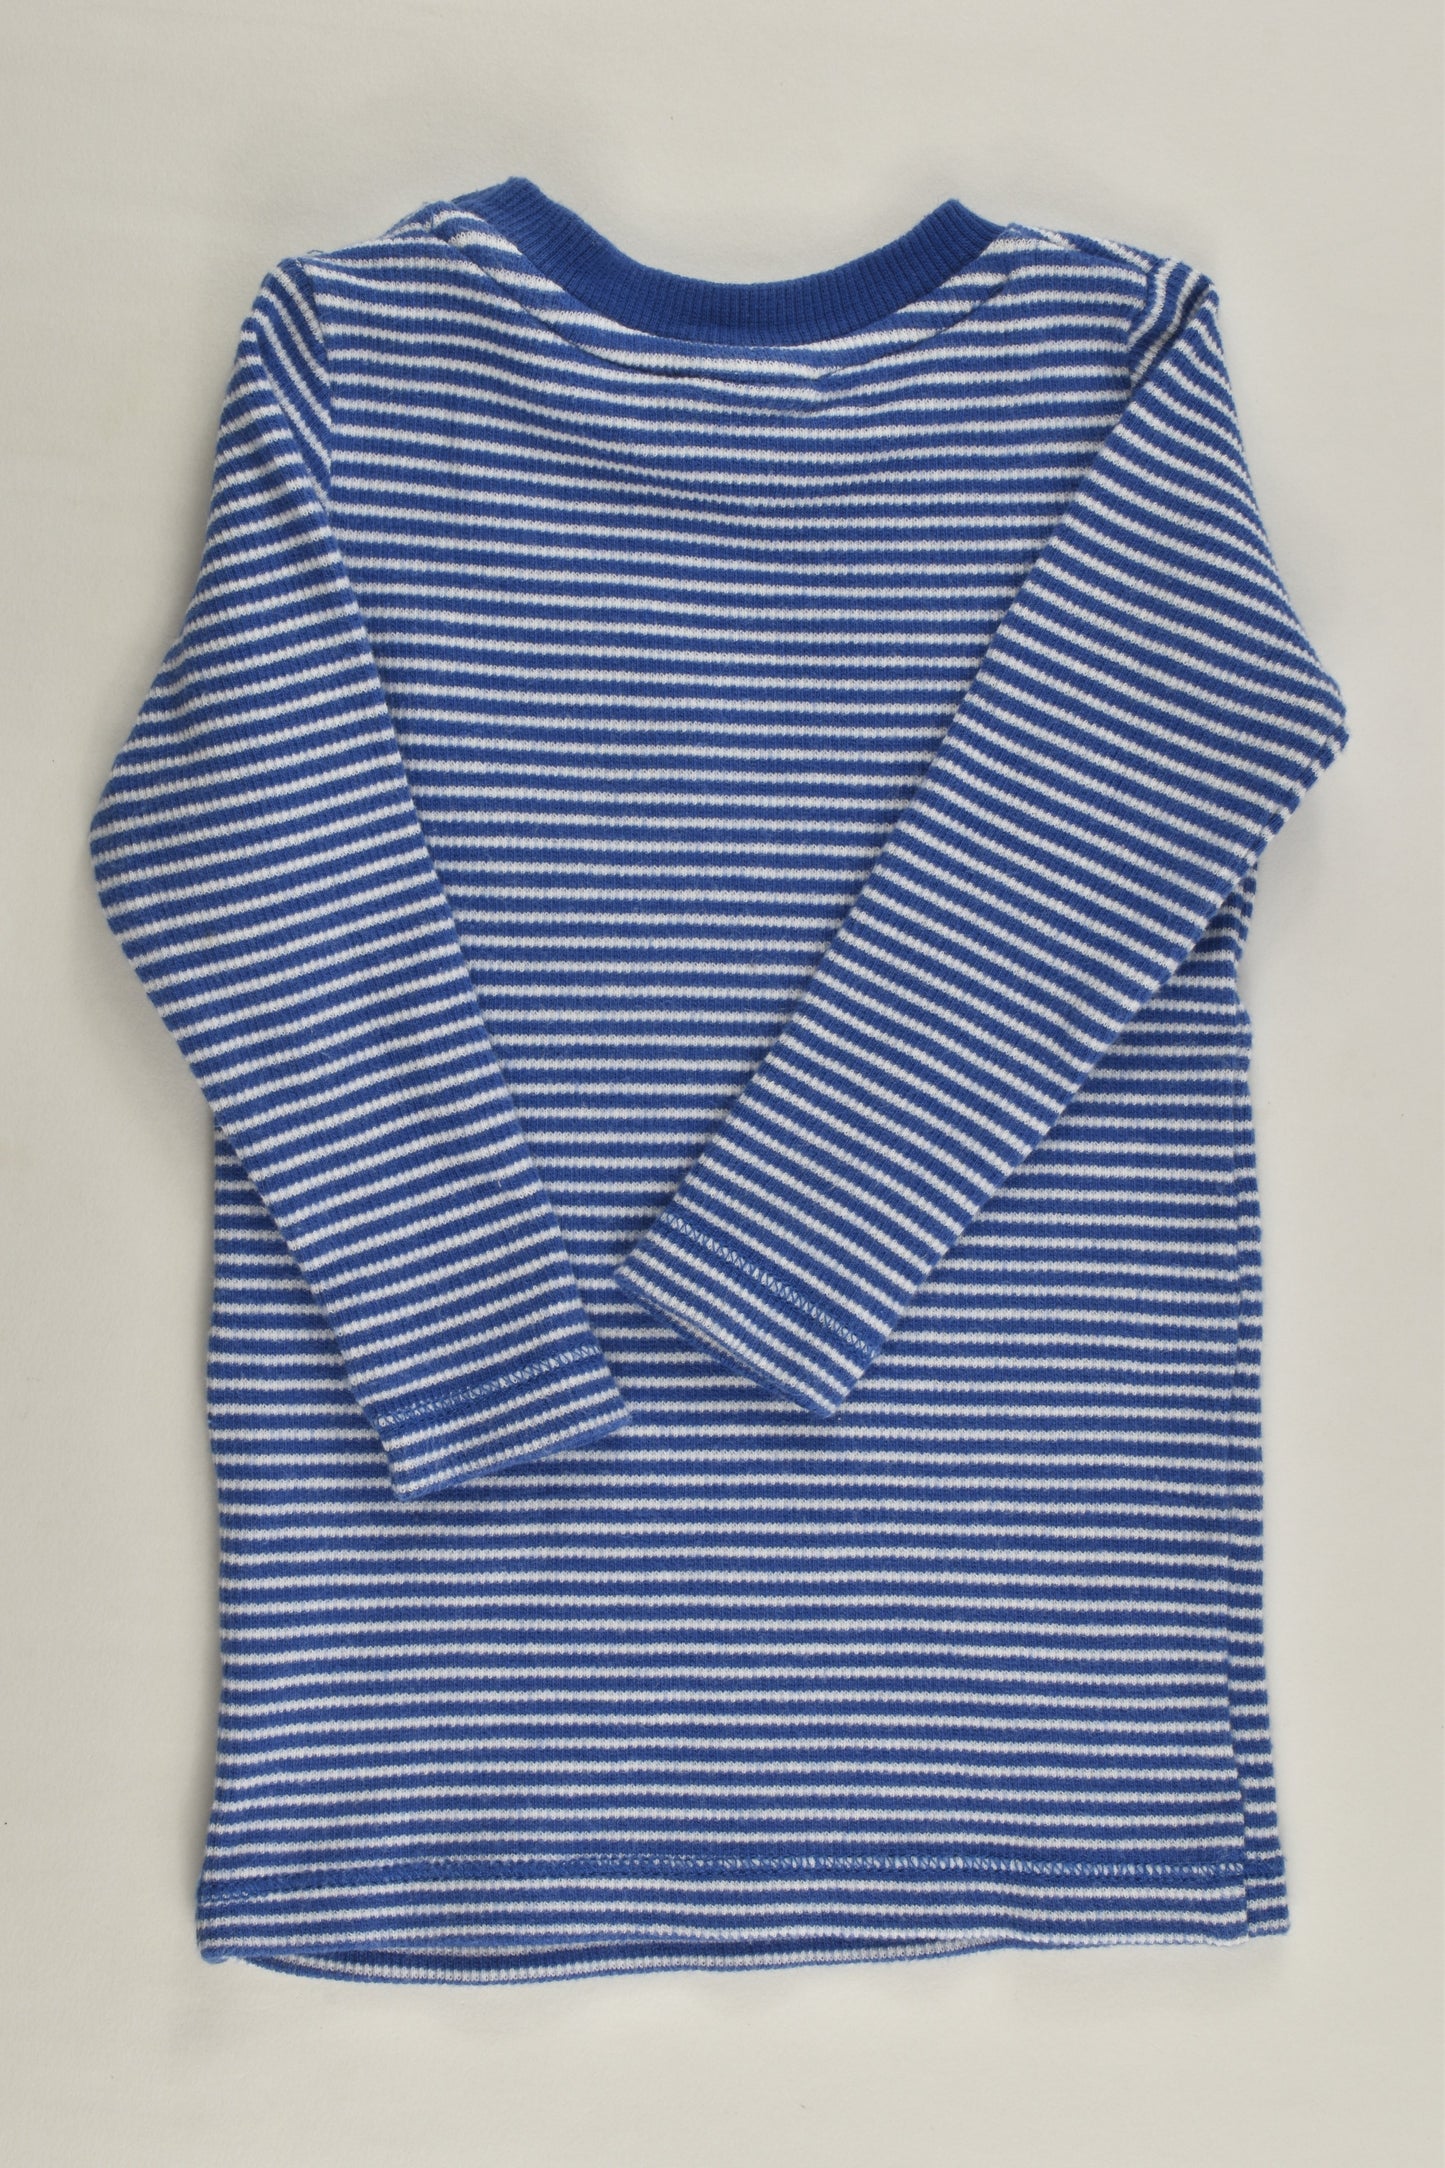 Seed Heritage Size 00 Striped Beach Ball Ribbed Top